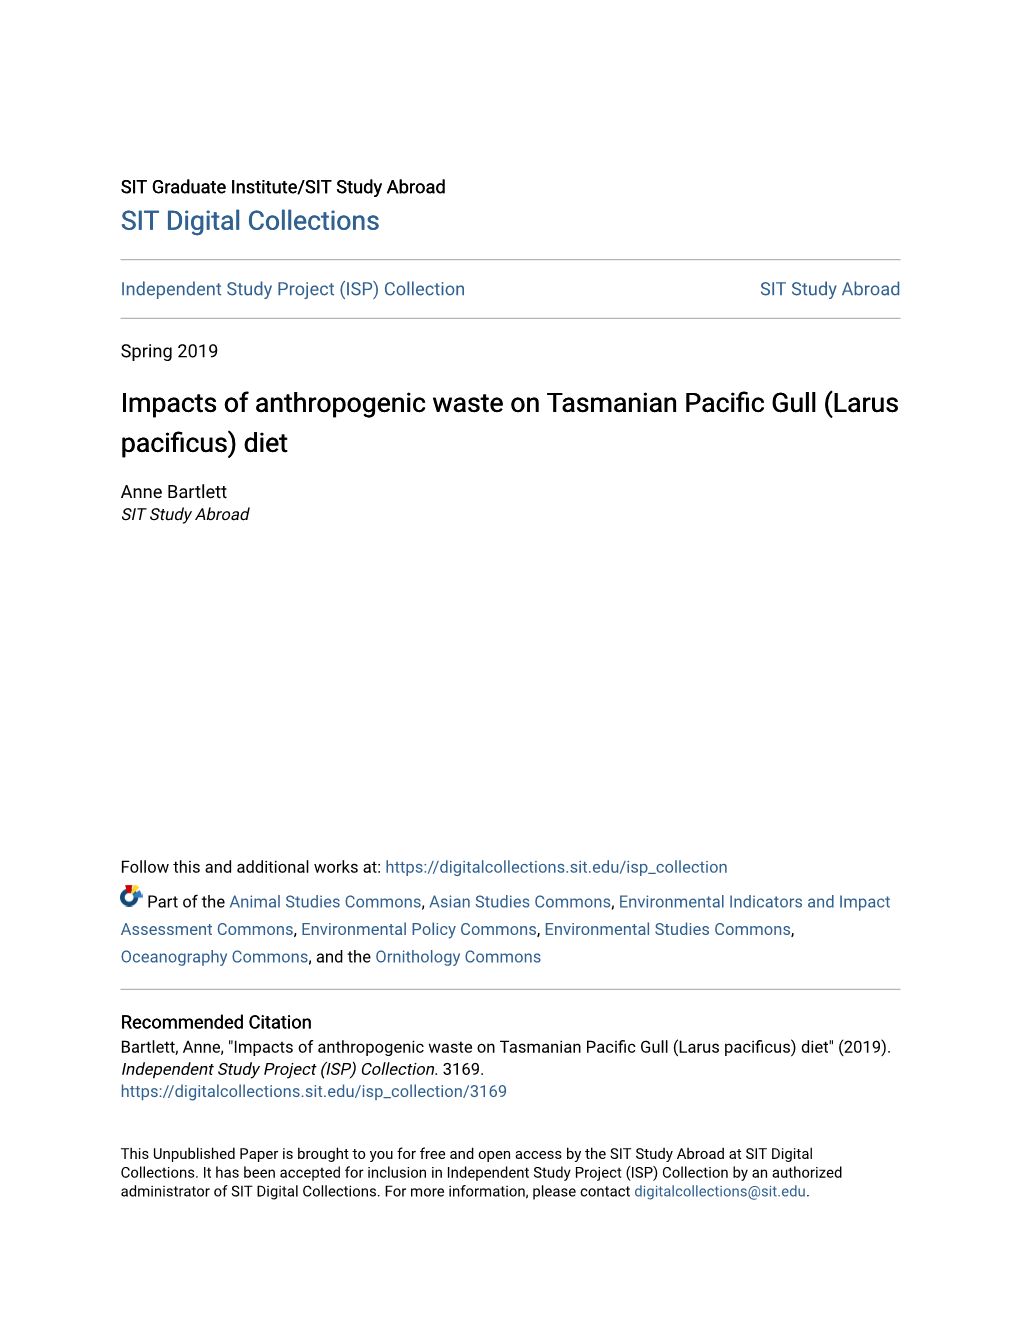 Impacts of Anthropogenic Waste on Tasmanian Pacific Gull (Larus Pacificus) Diet